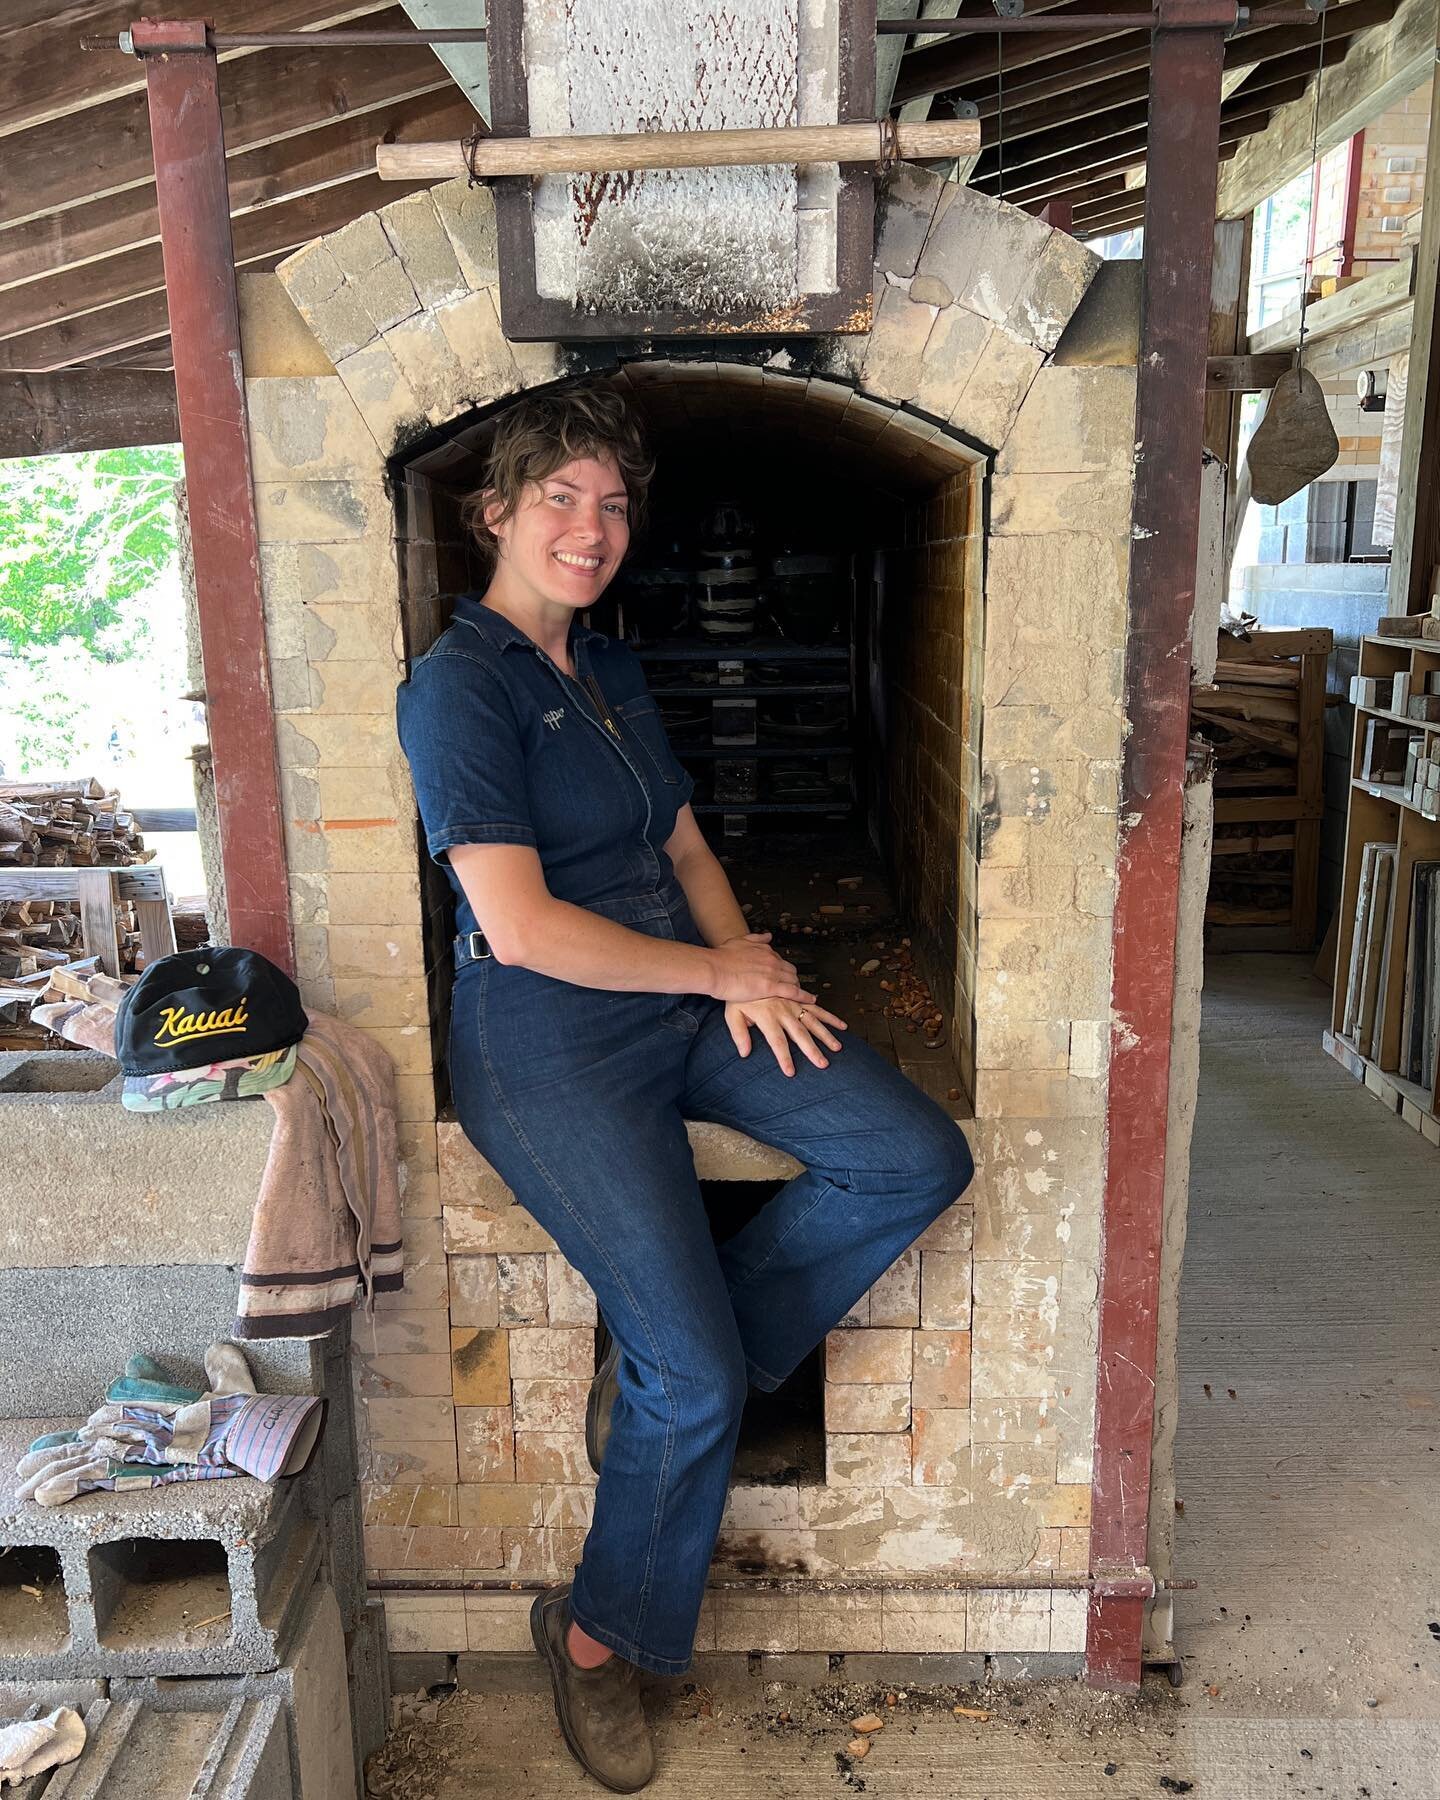 Posing with kilns is in the top tier of nerdy, irresistible potter impulses. Especially at an adult sleep away summer camp for said nerds. Also the most fun I&rsquo;ve had in years 🤓😎 #penlandforever 
.
.
.

#lizware #ceramics #pottery #handmadegif